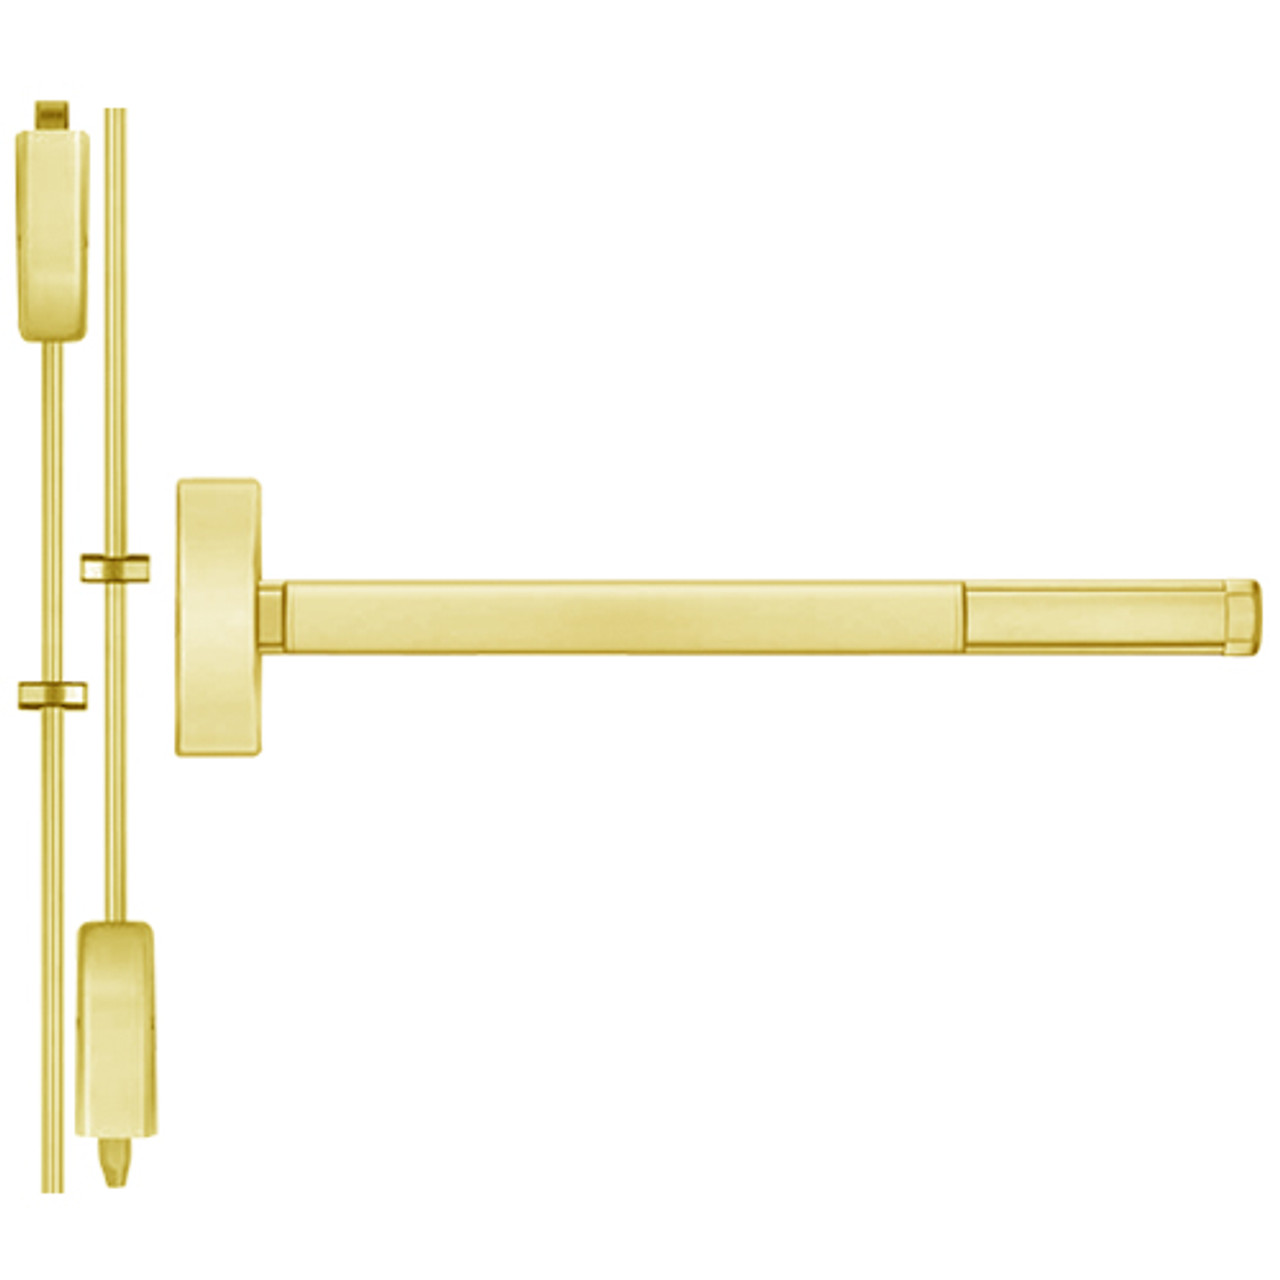 TS2215LBR-605-48 PHI 2200 Series Non Fire Rated Apex Surface Vertical Rod Device with Touchbar Monitoring Switch Prepped for Thumb Piece Always Active in Bright Brass Finish